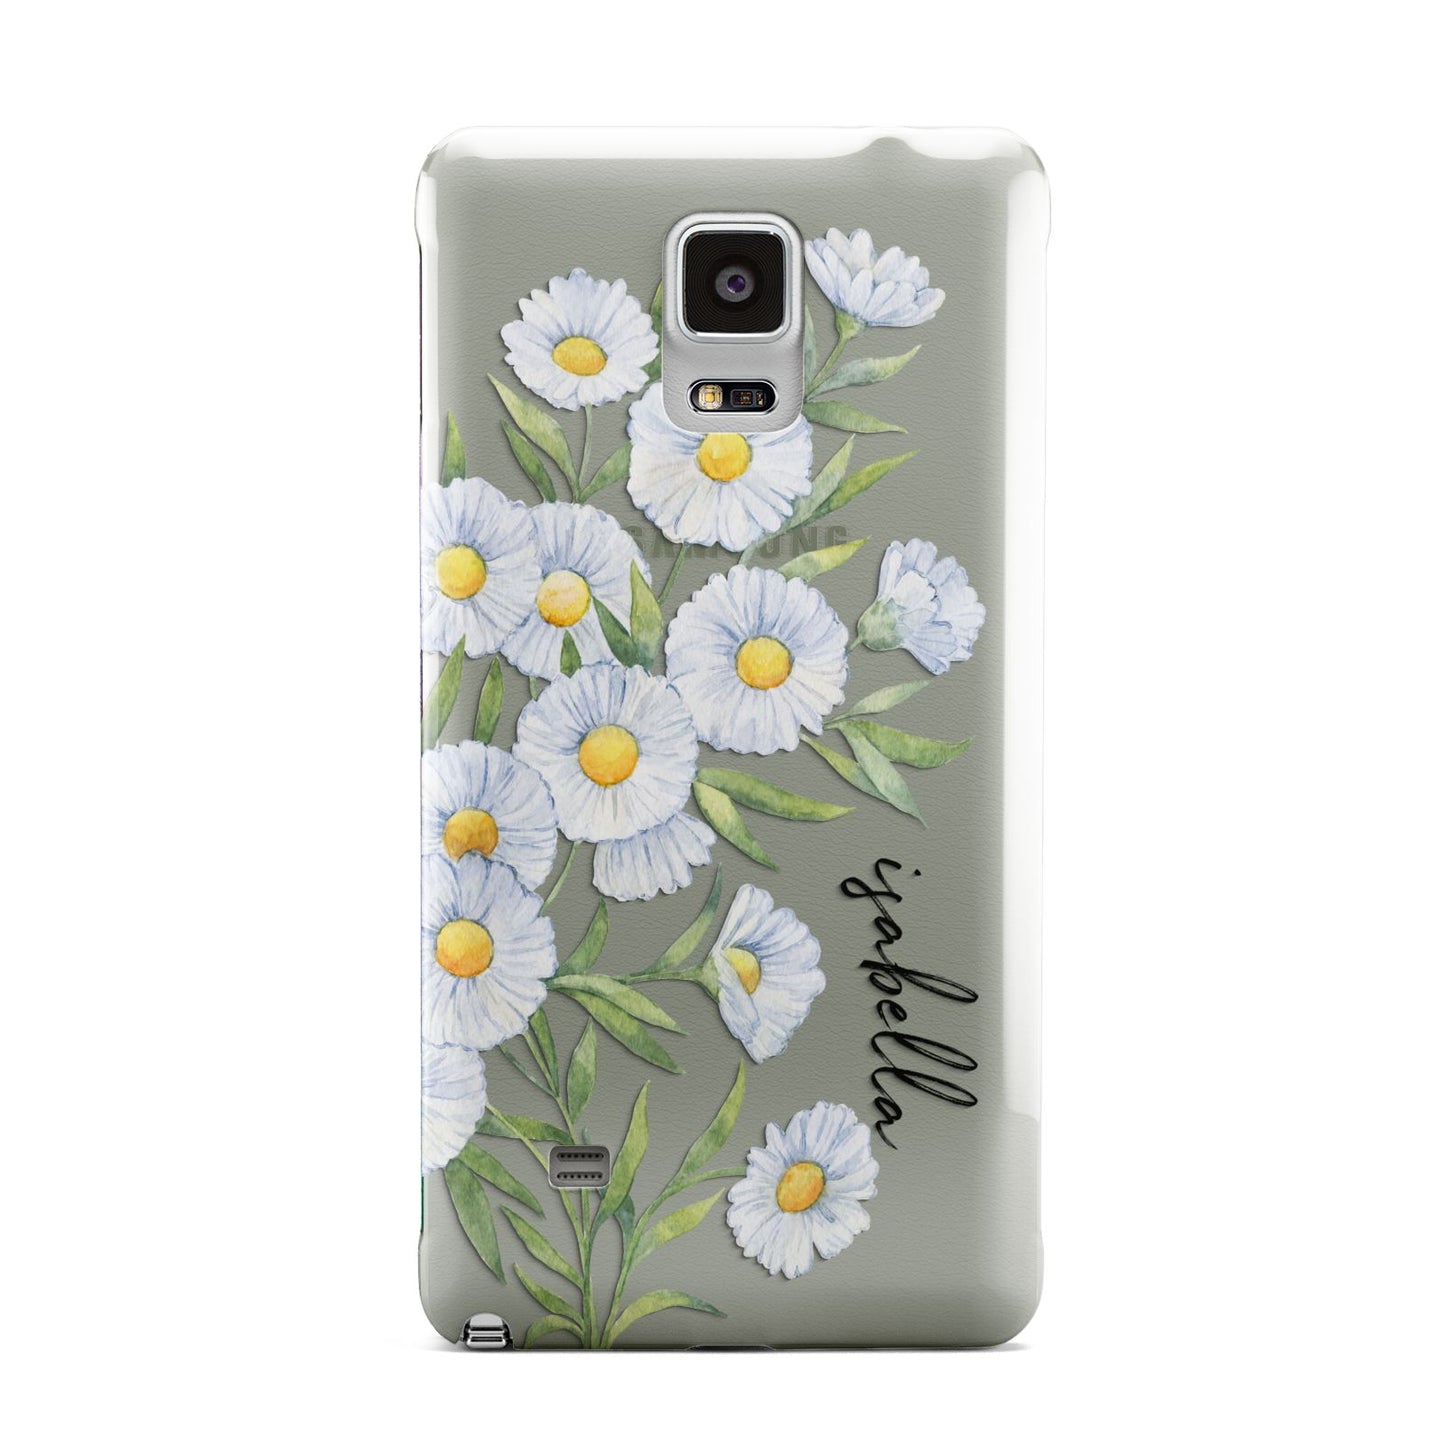 Personalised Daisy Flower Samsung Galaxy Note 4 Case